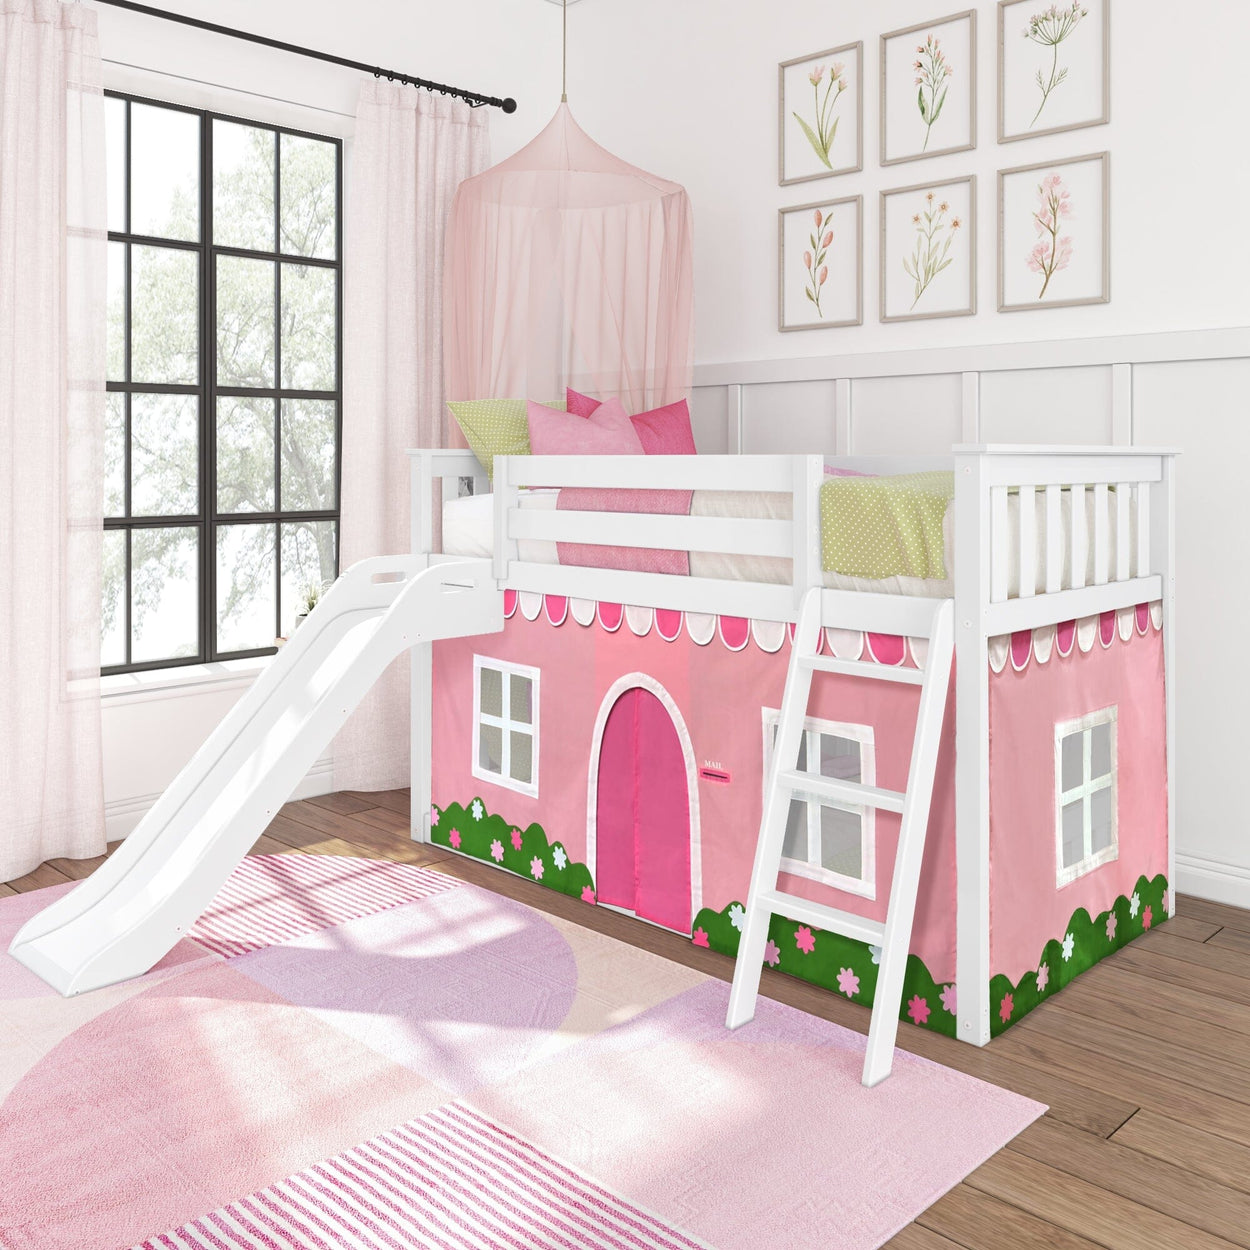 180417002064 : Bunk Beds Low Bunk with Easy Slide and Light Pink and White Farmhouse Curtain, White